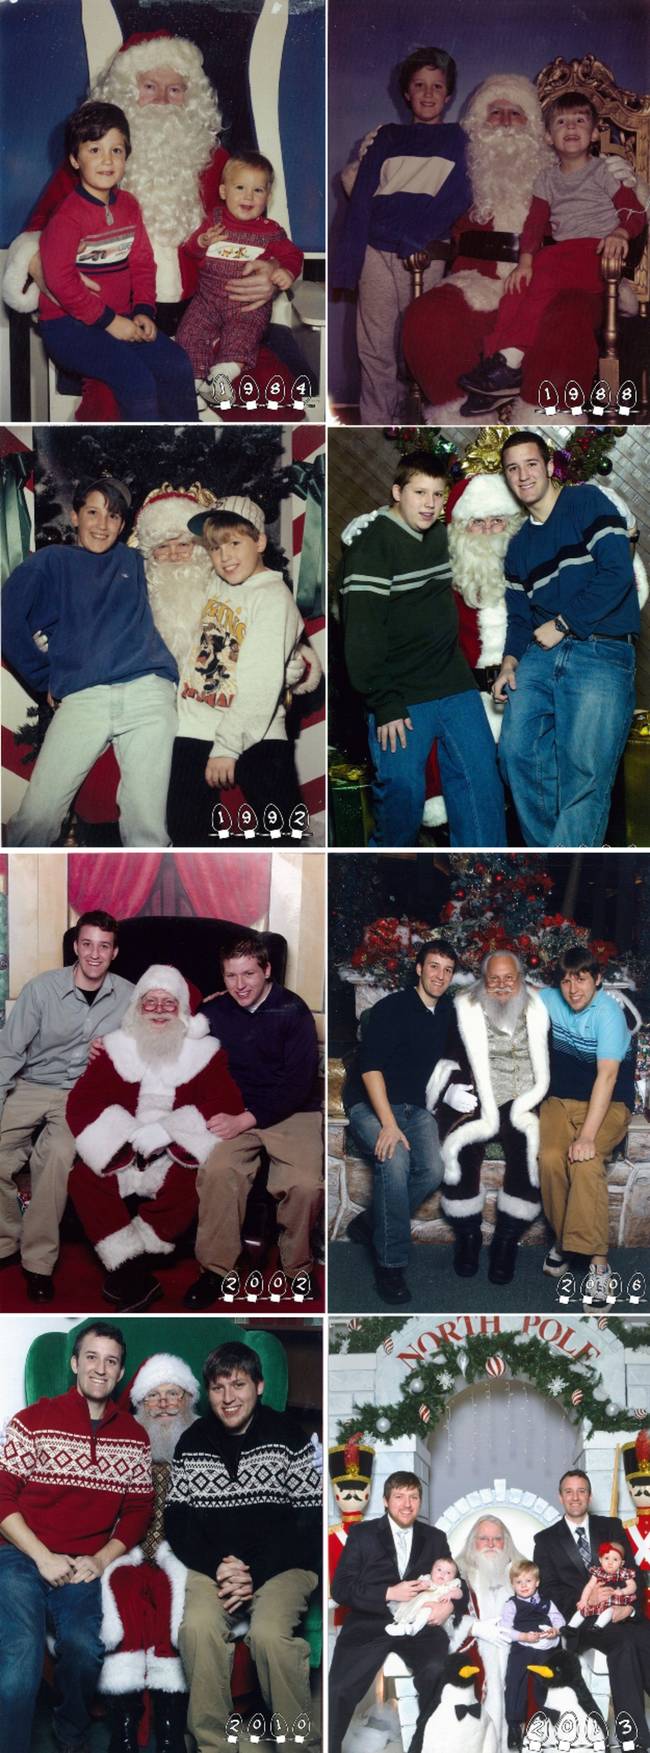 5. Taking a picture with Santa every year since 1984. Classic?